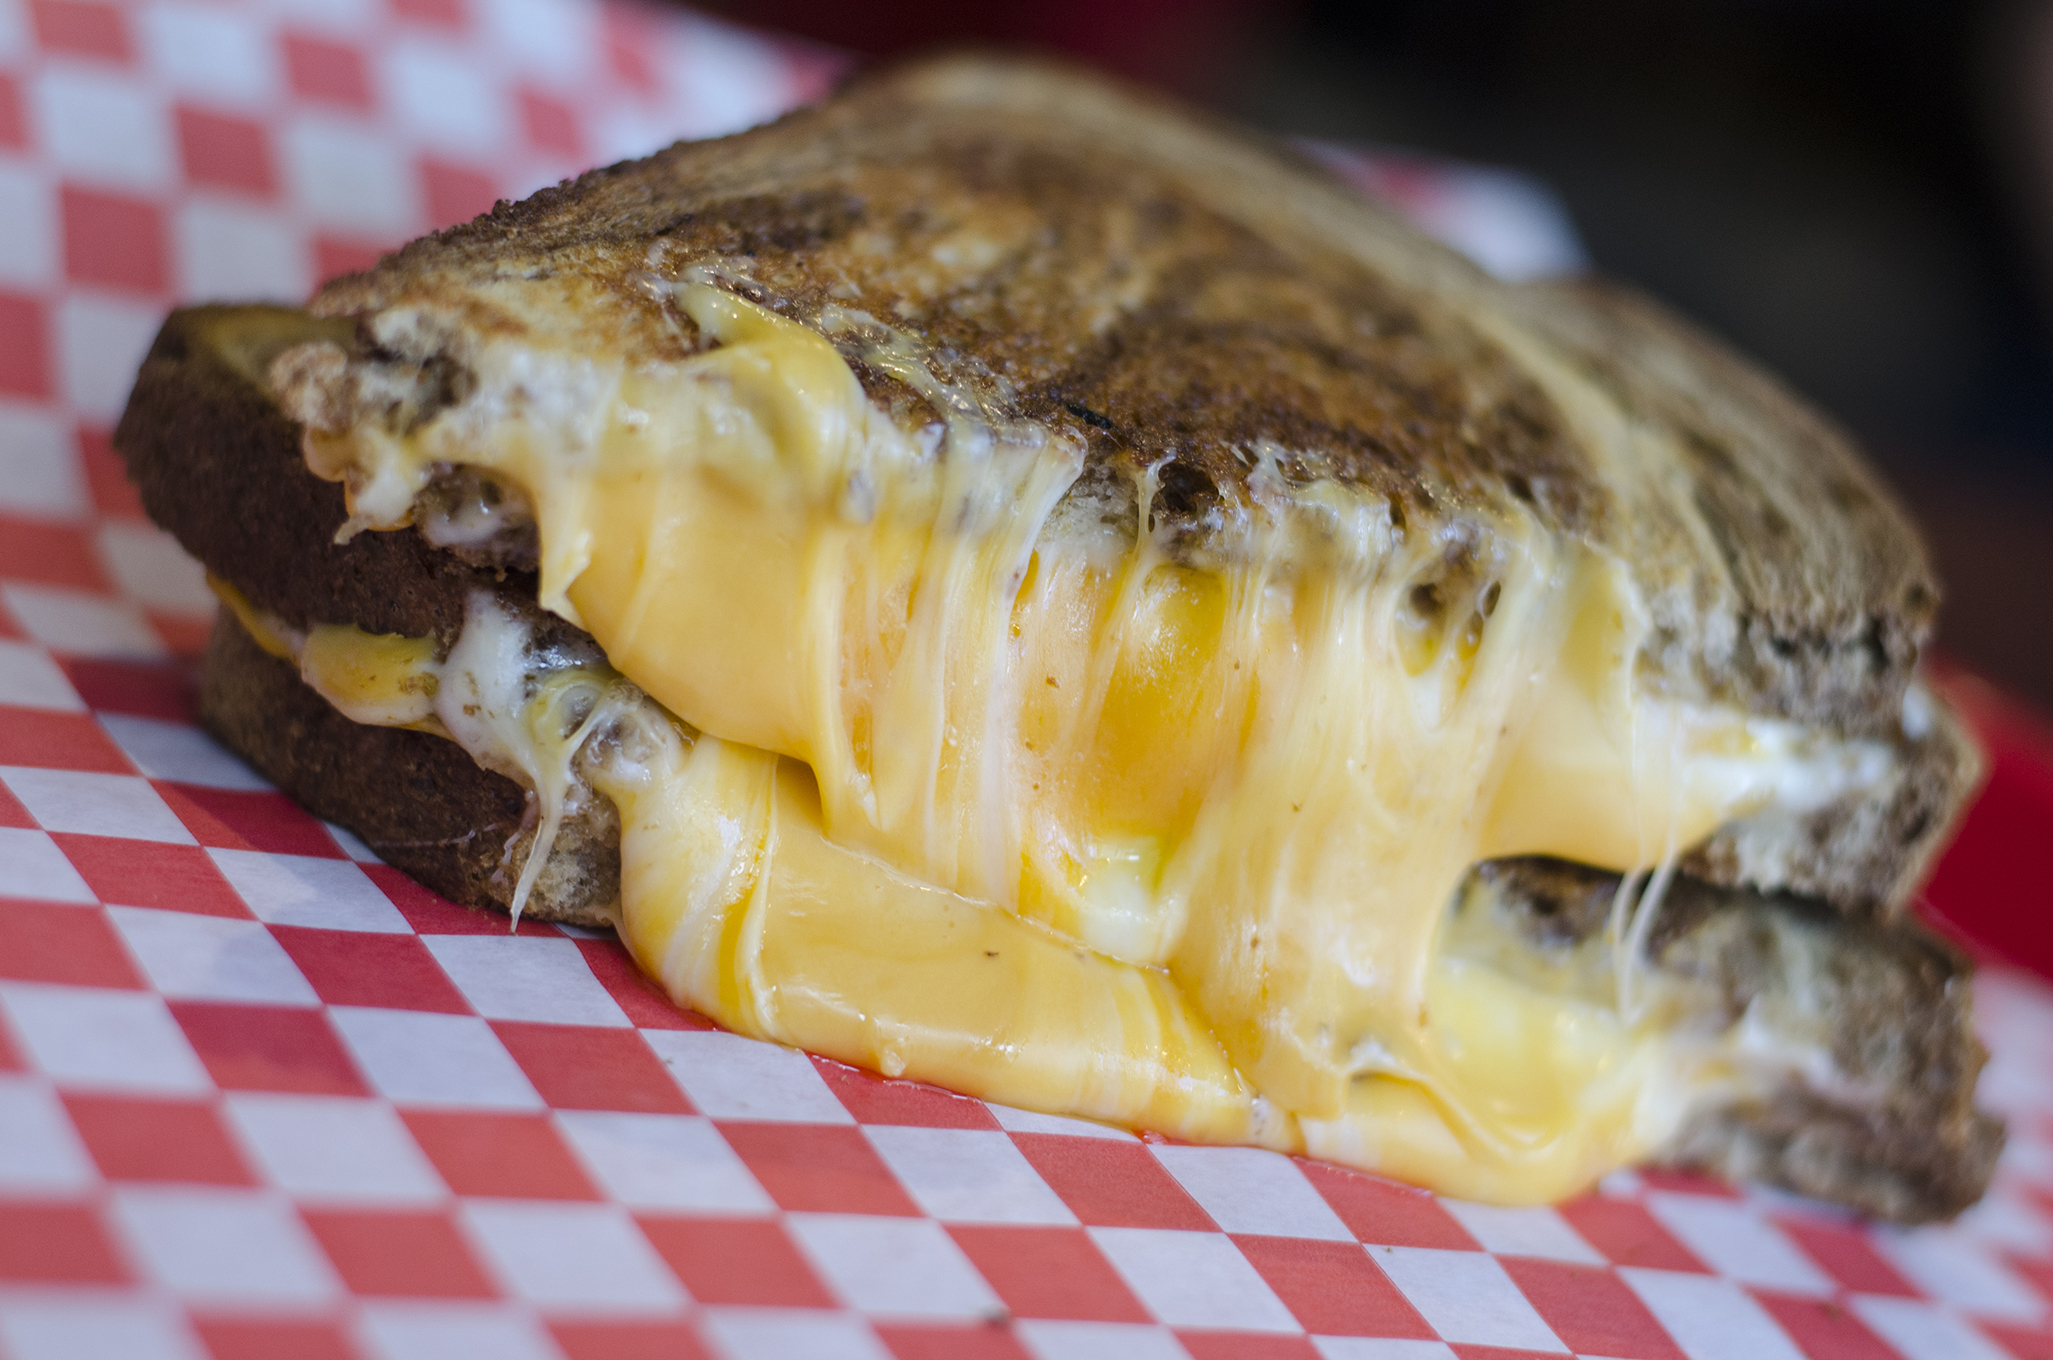 The Original grilled cheese from Toasty's in Windsor, Ontario.